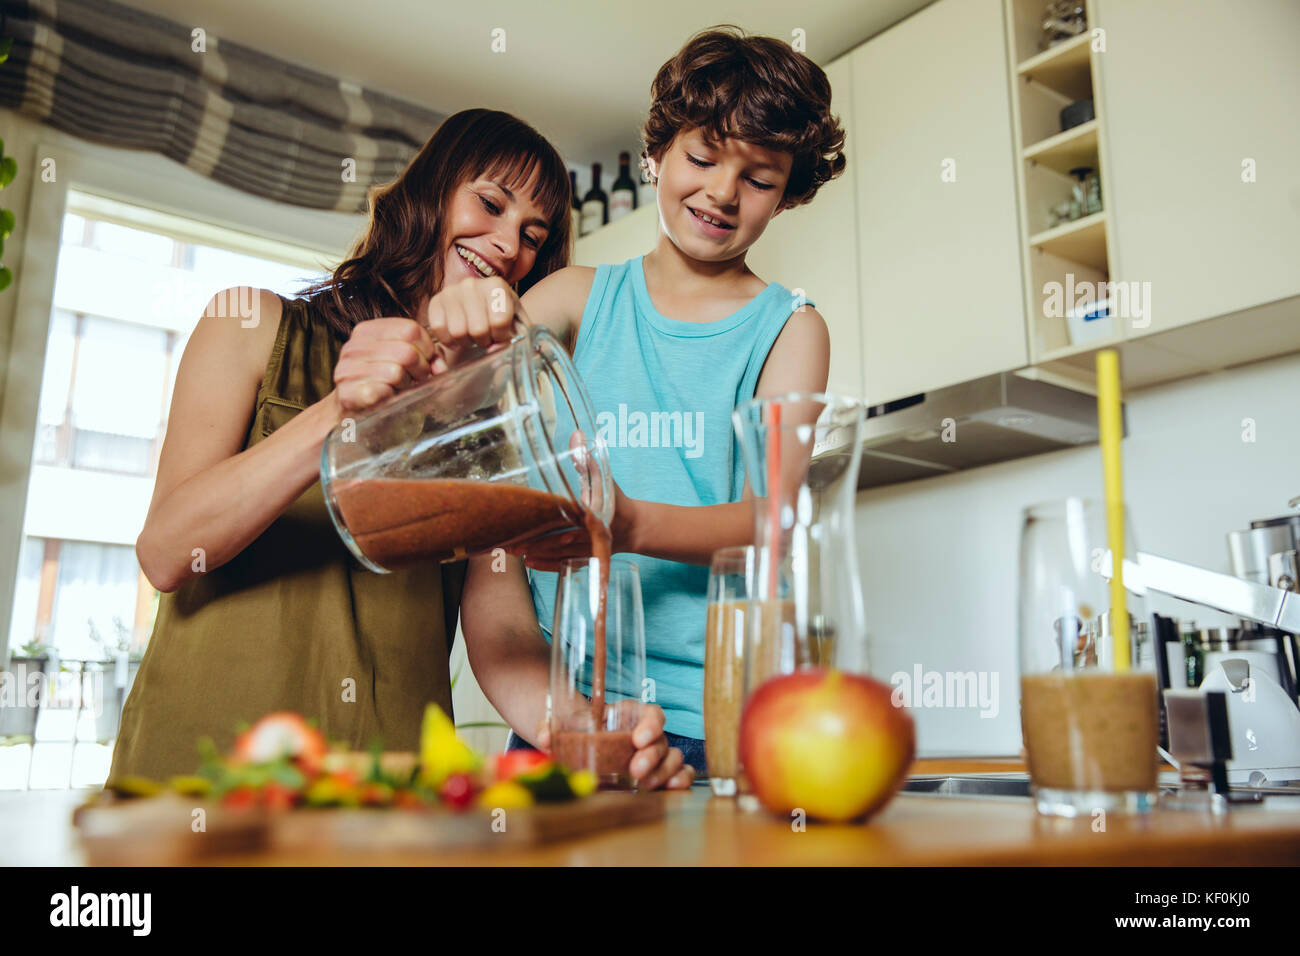 Mother and son pouring smoothie into glass Stock Photo